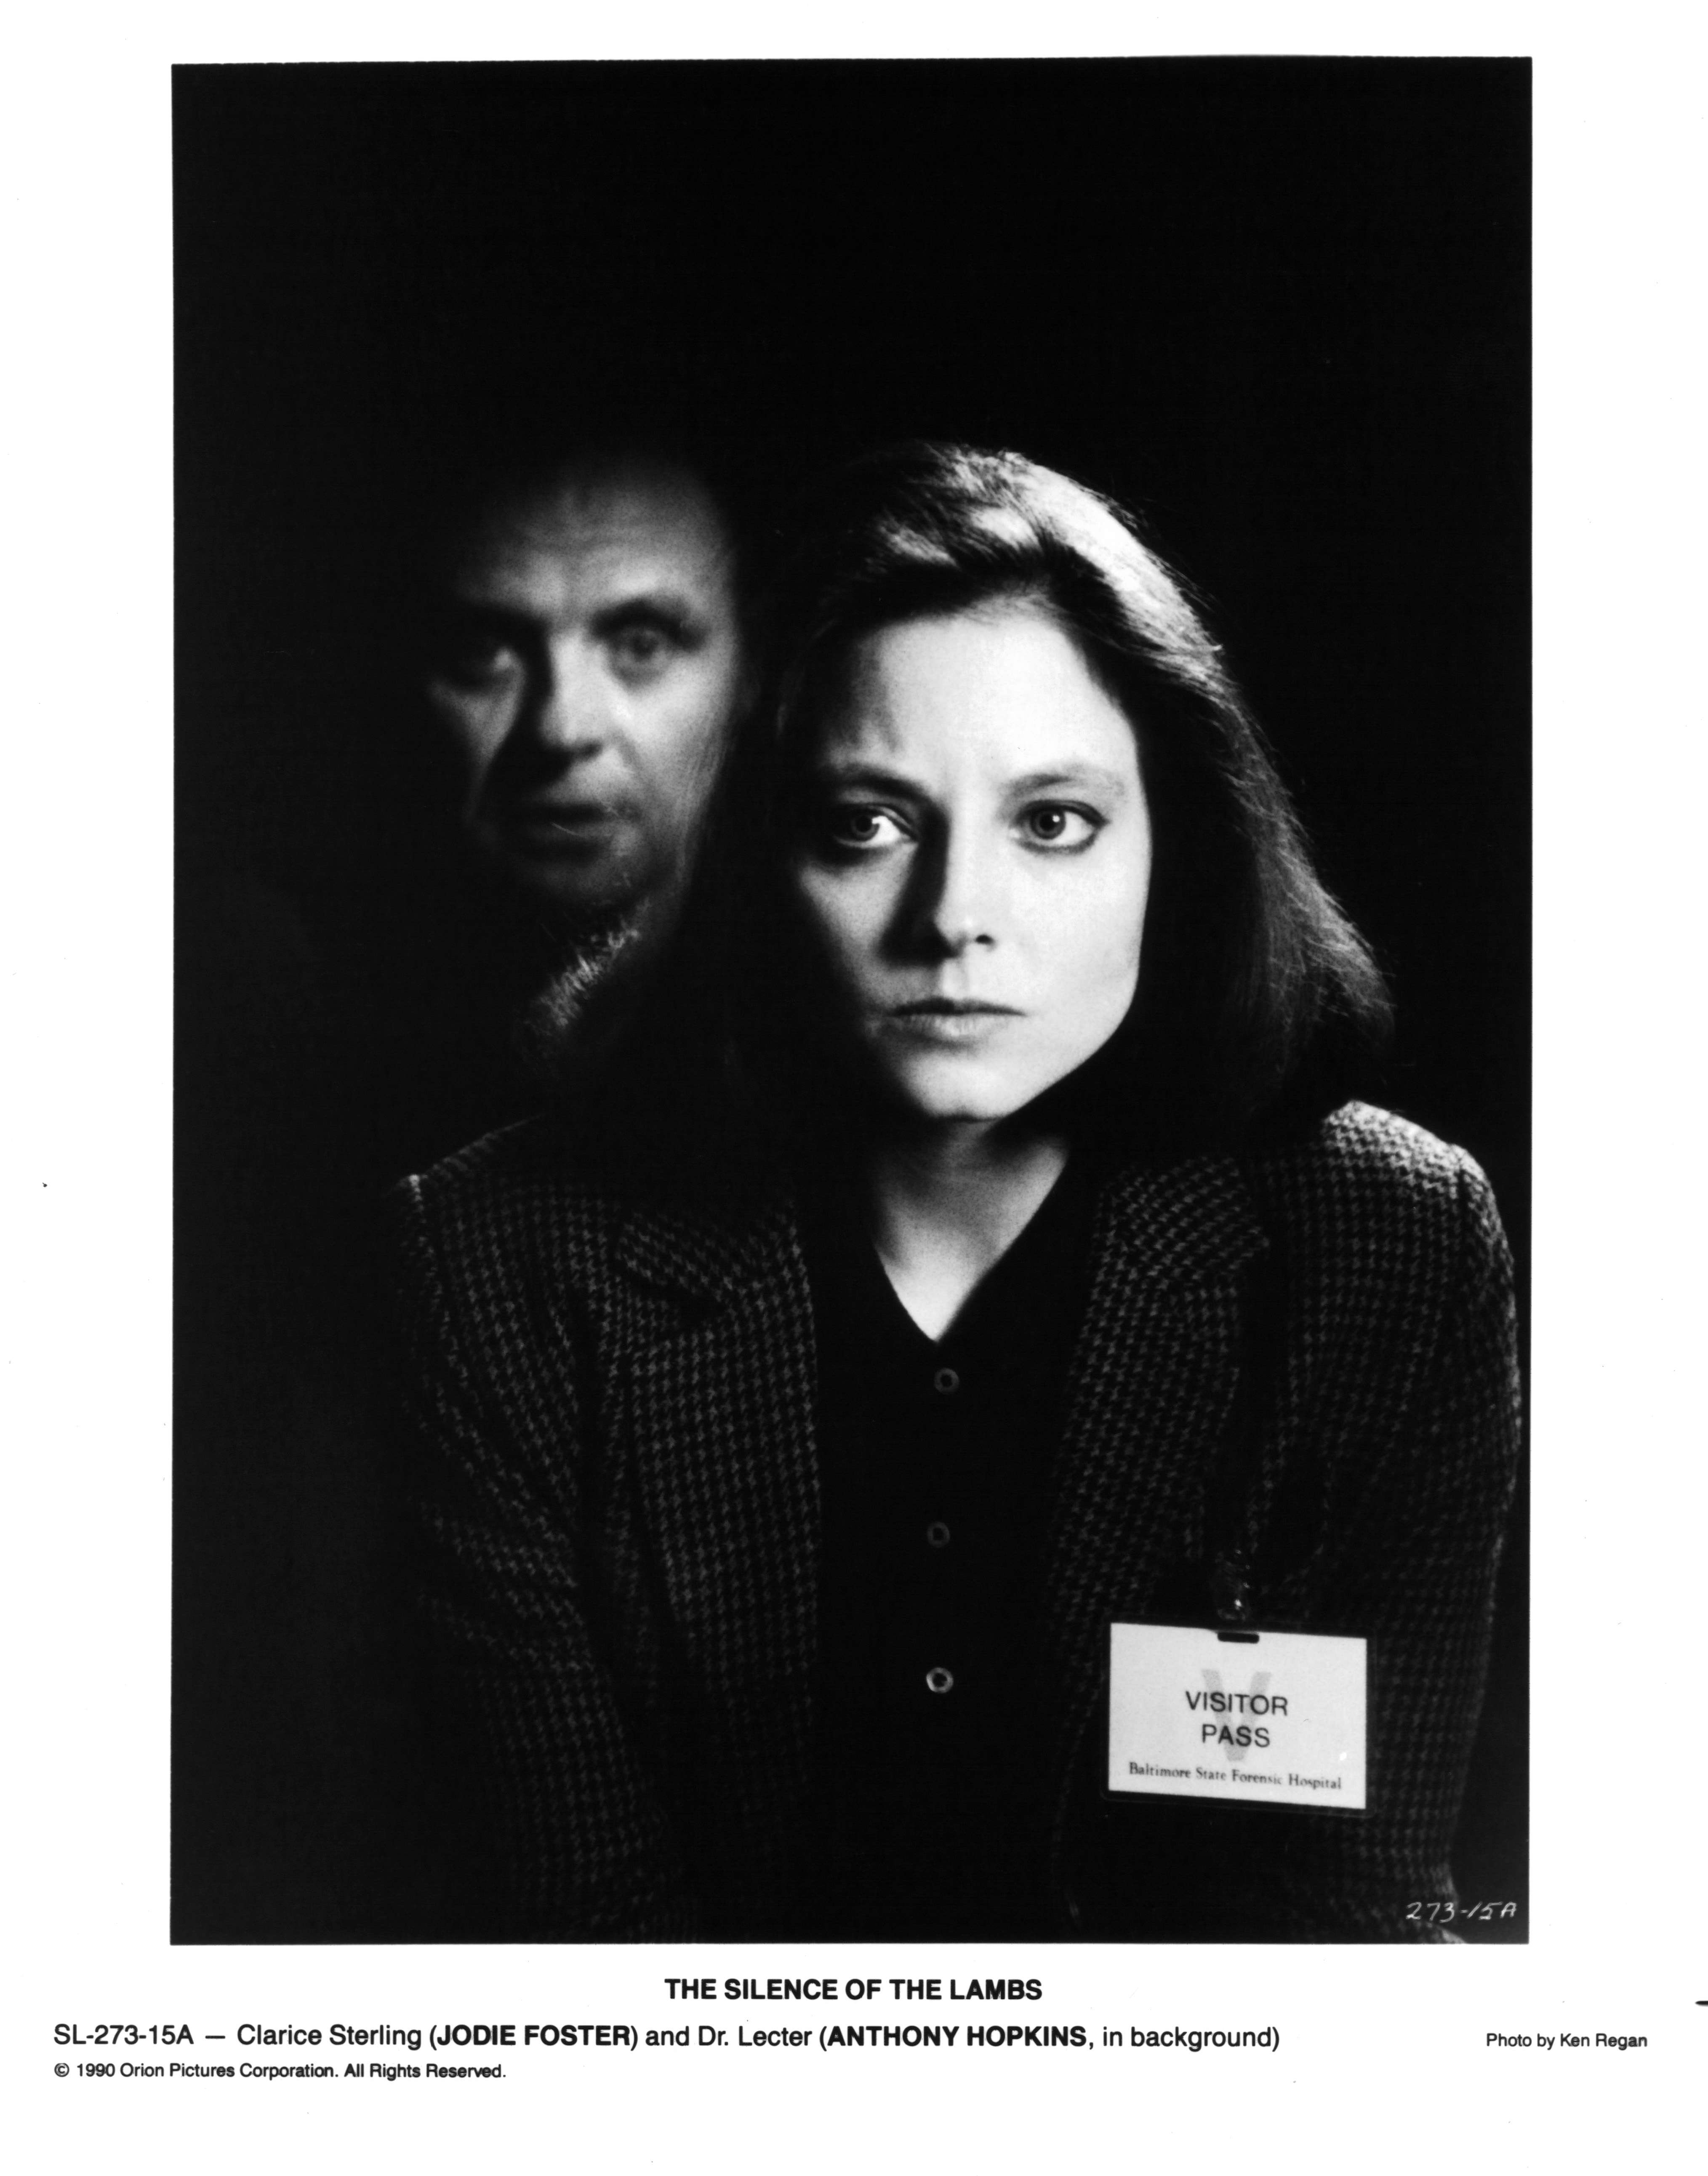 Anthony Hopkins and Jodie Foster on set of The Silence of the Lambs 